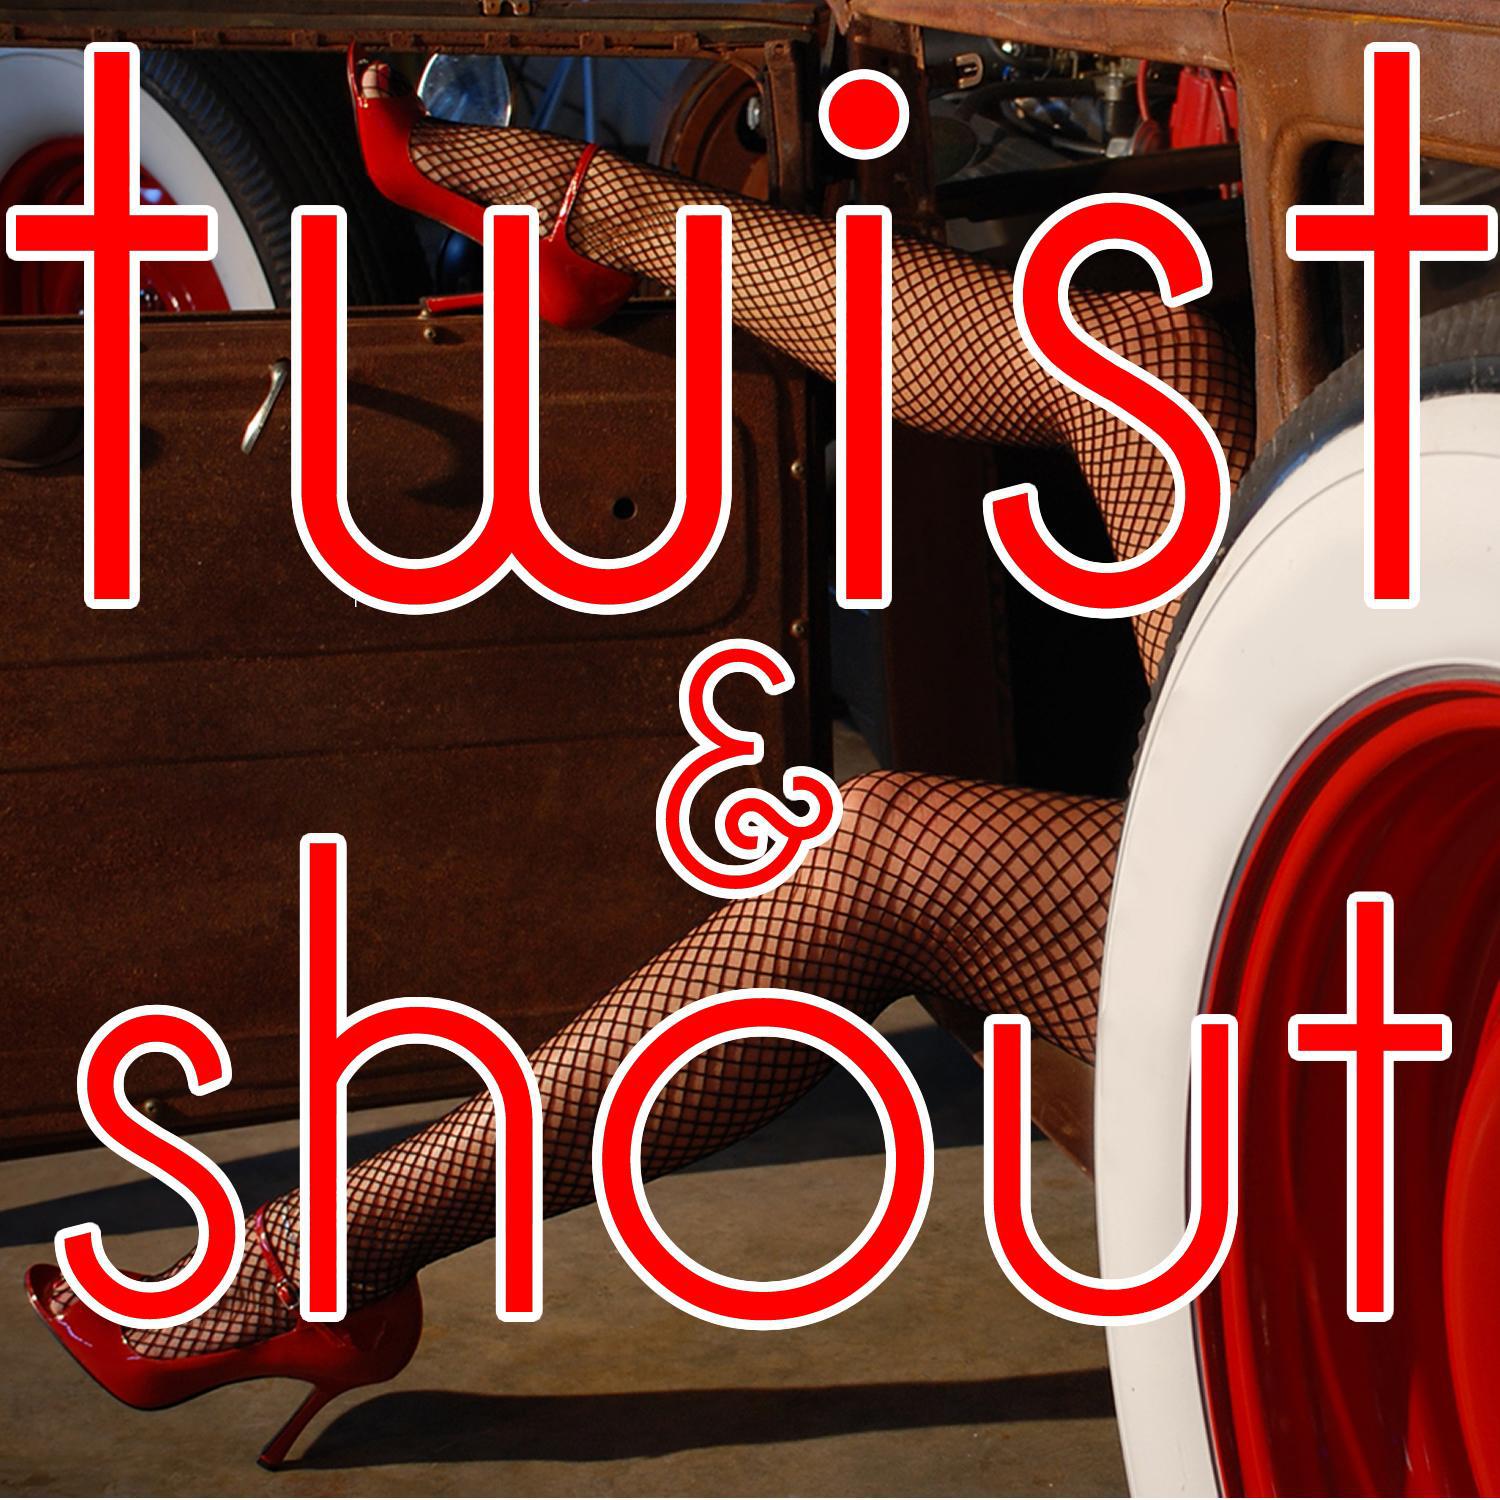 Twist and Shout: The Very Best Golden Oldies Hits by Roy Orbison, The Righteous Brothers, The Ronettes, Chiffons and More!